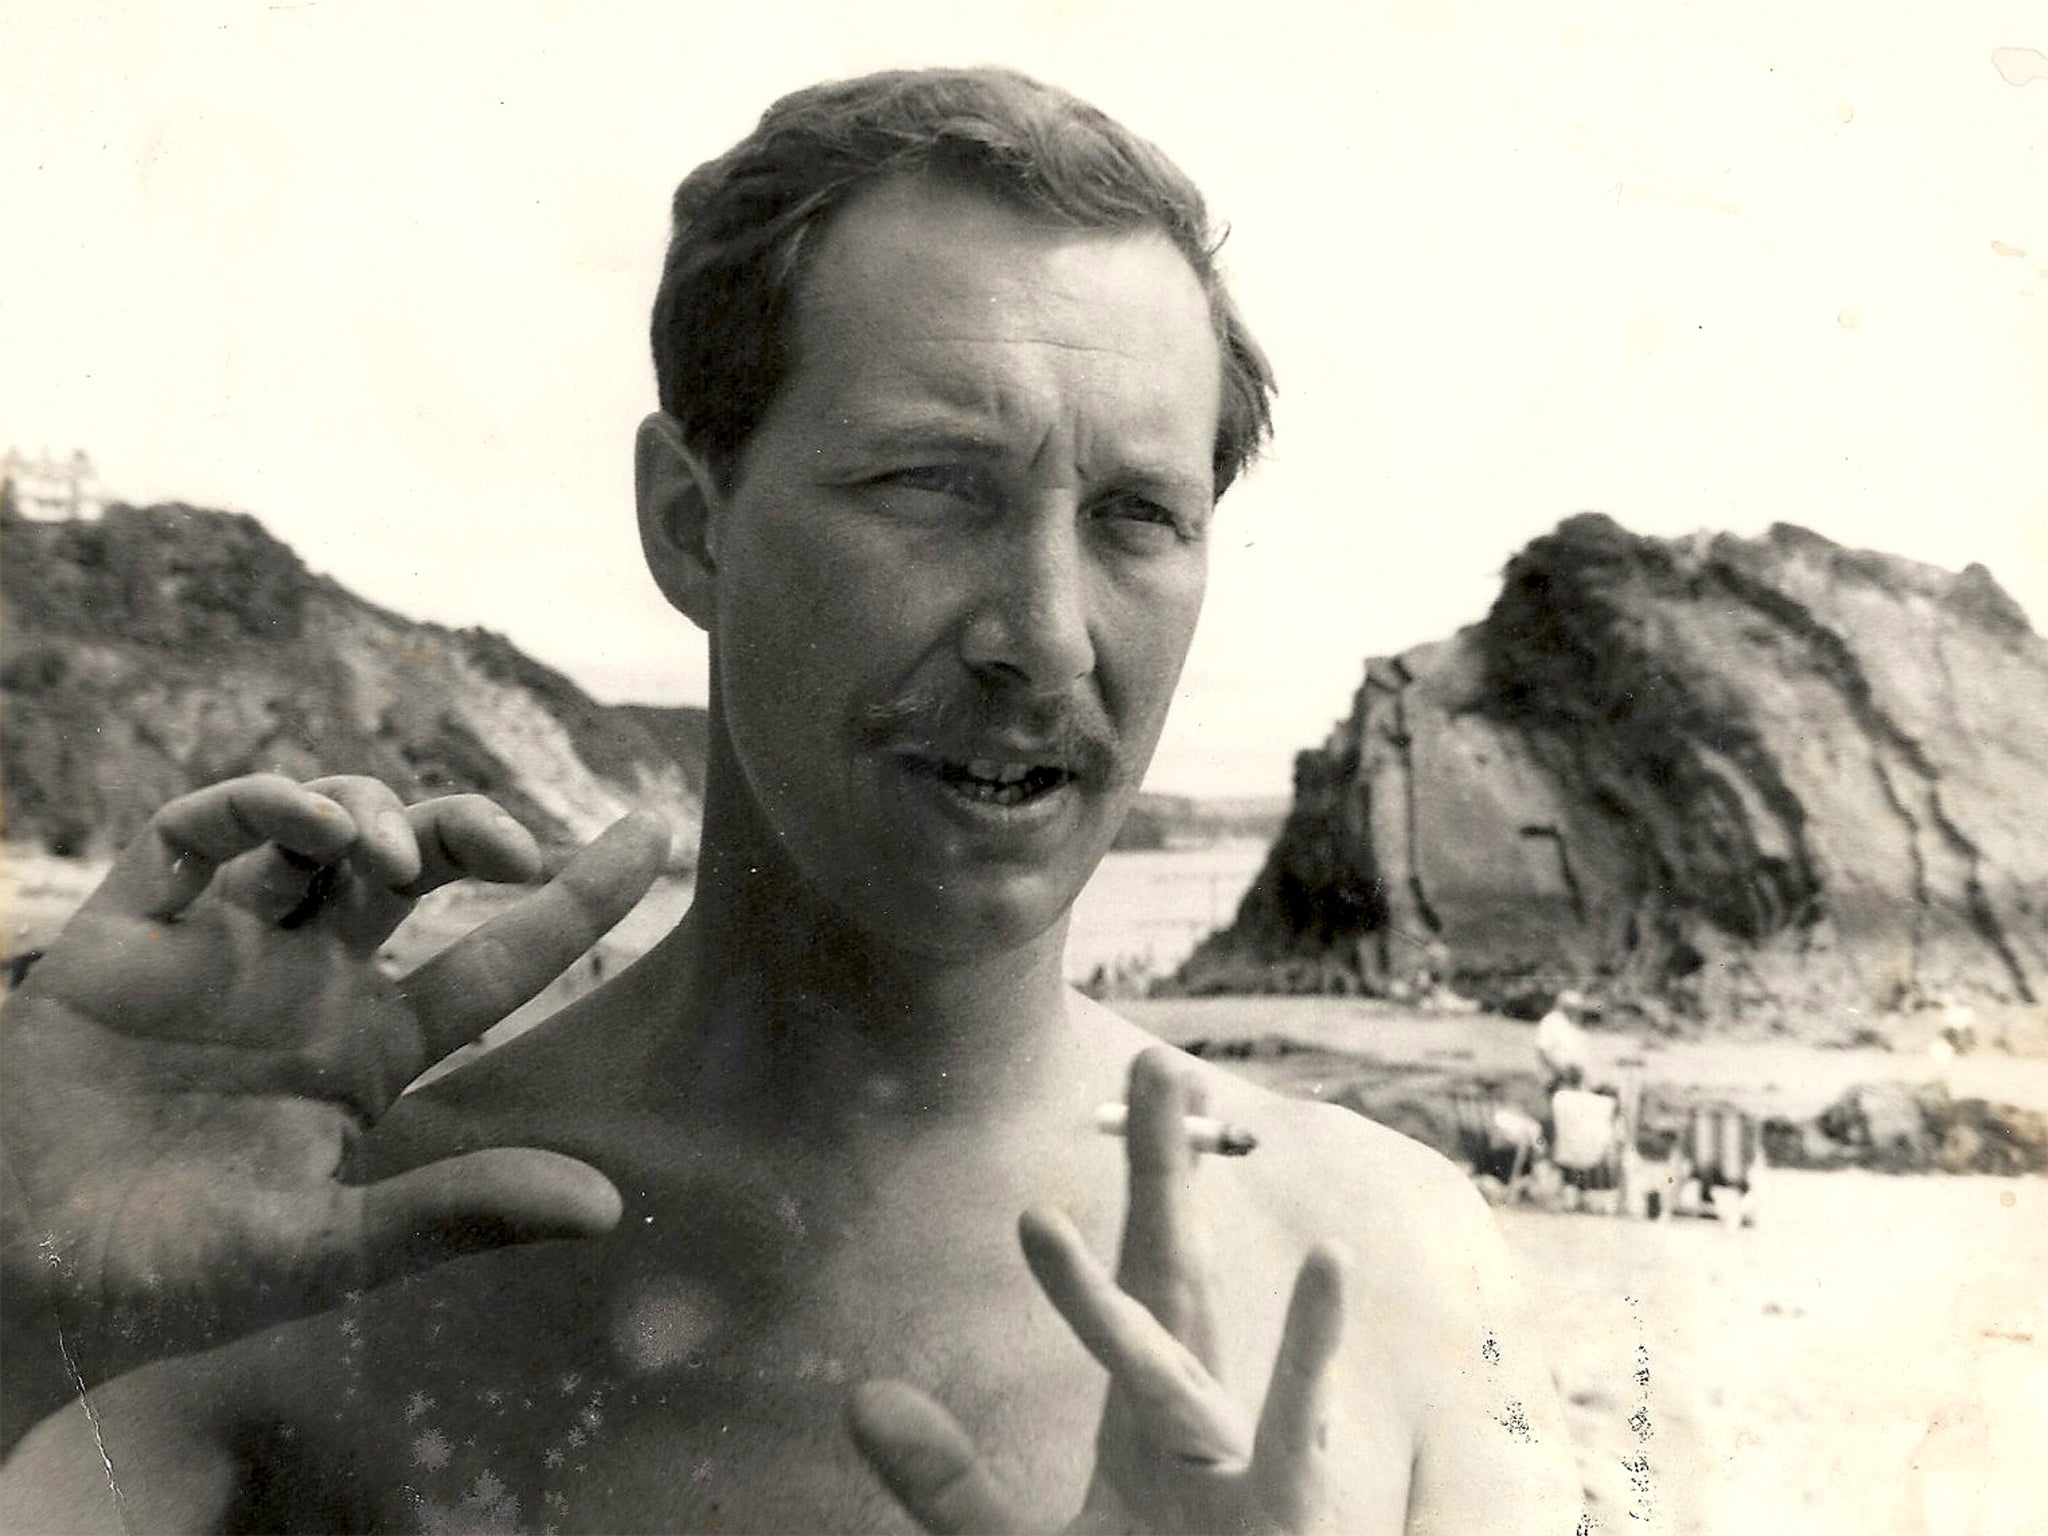 Hayes on the beach at Tenby in 1961 during the shooting of ‘The Andromeda Strain’